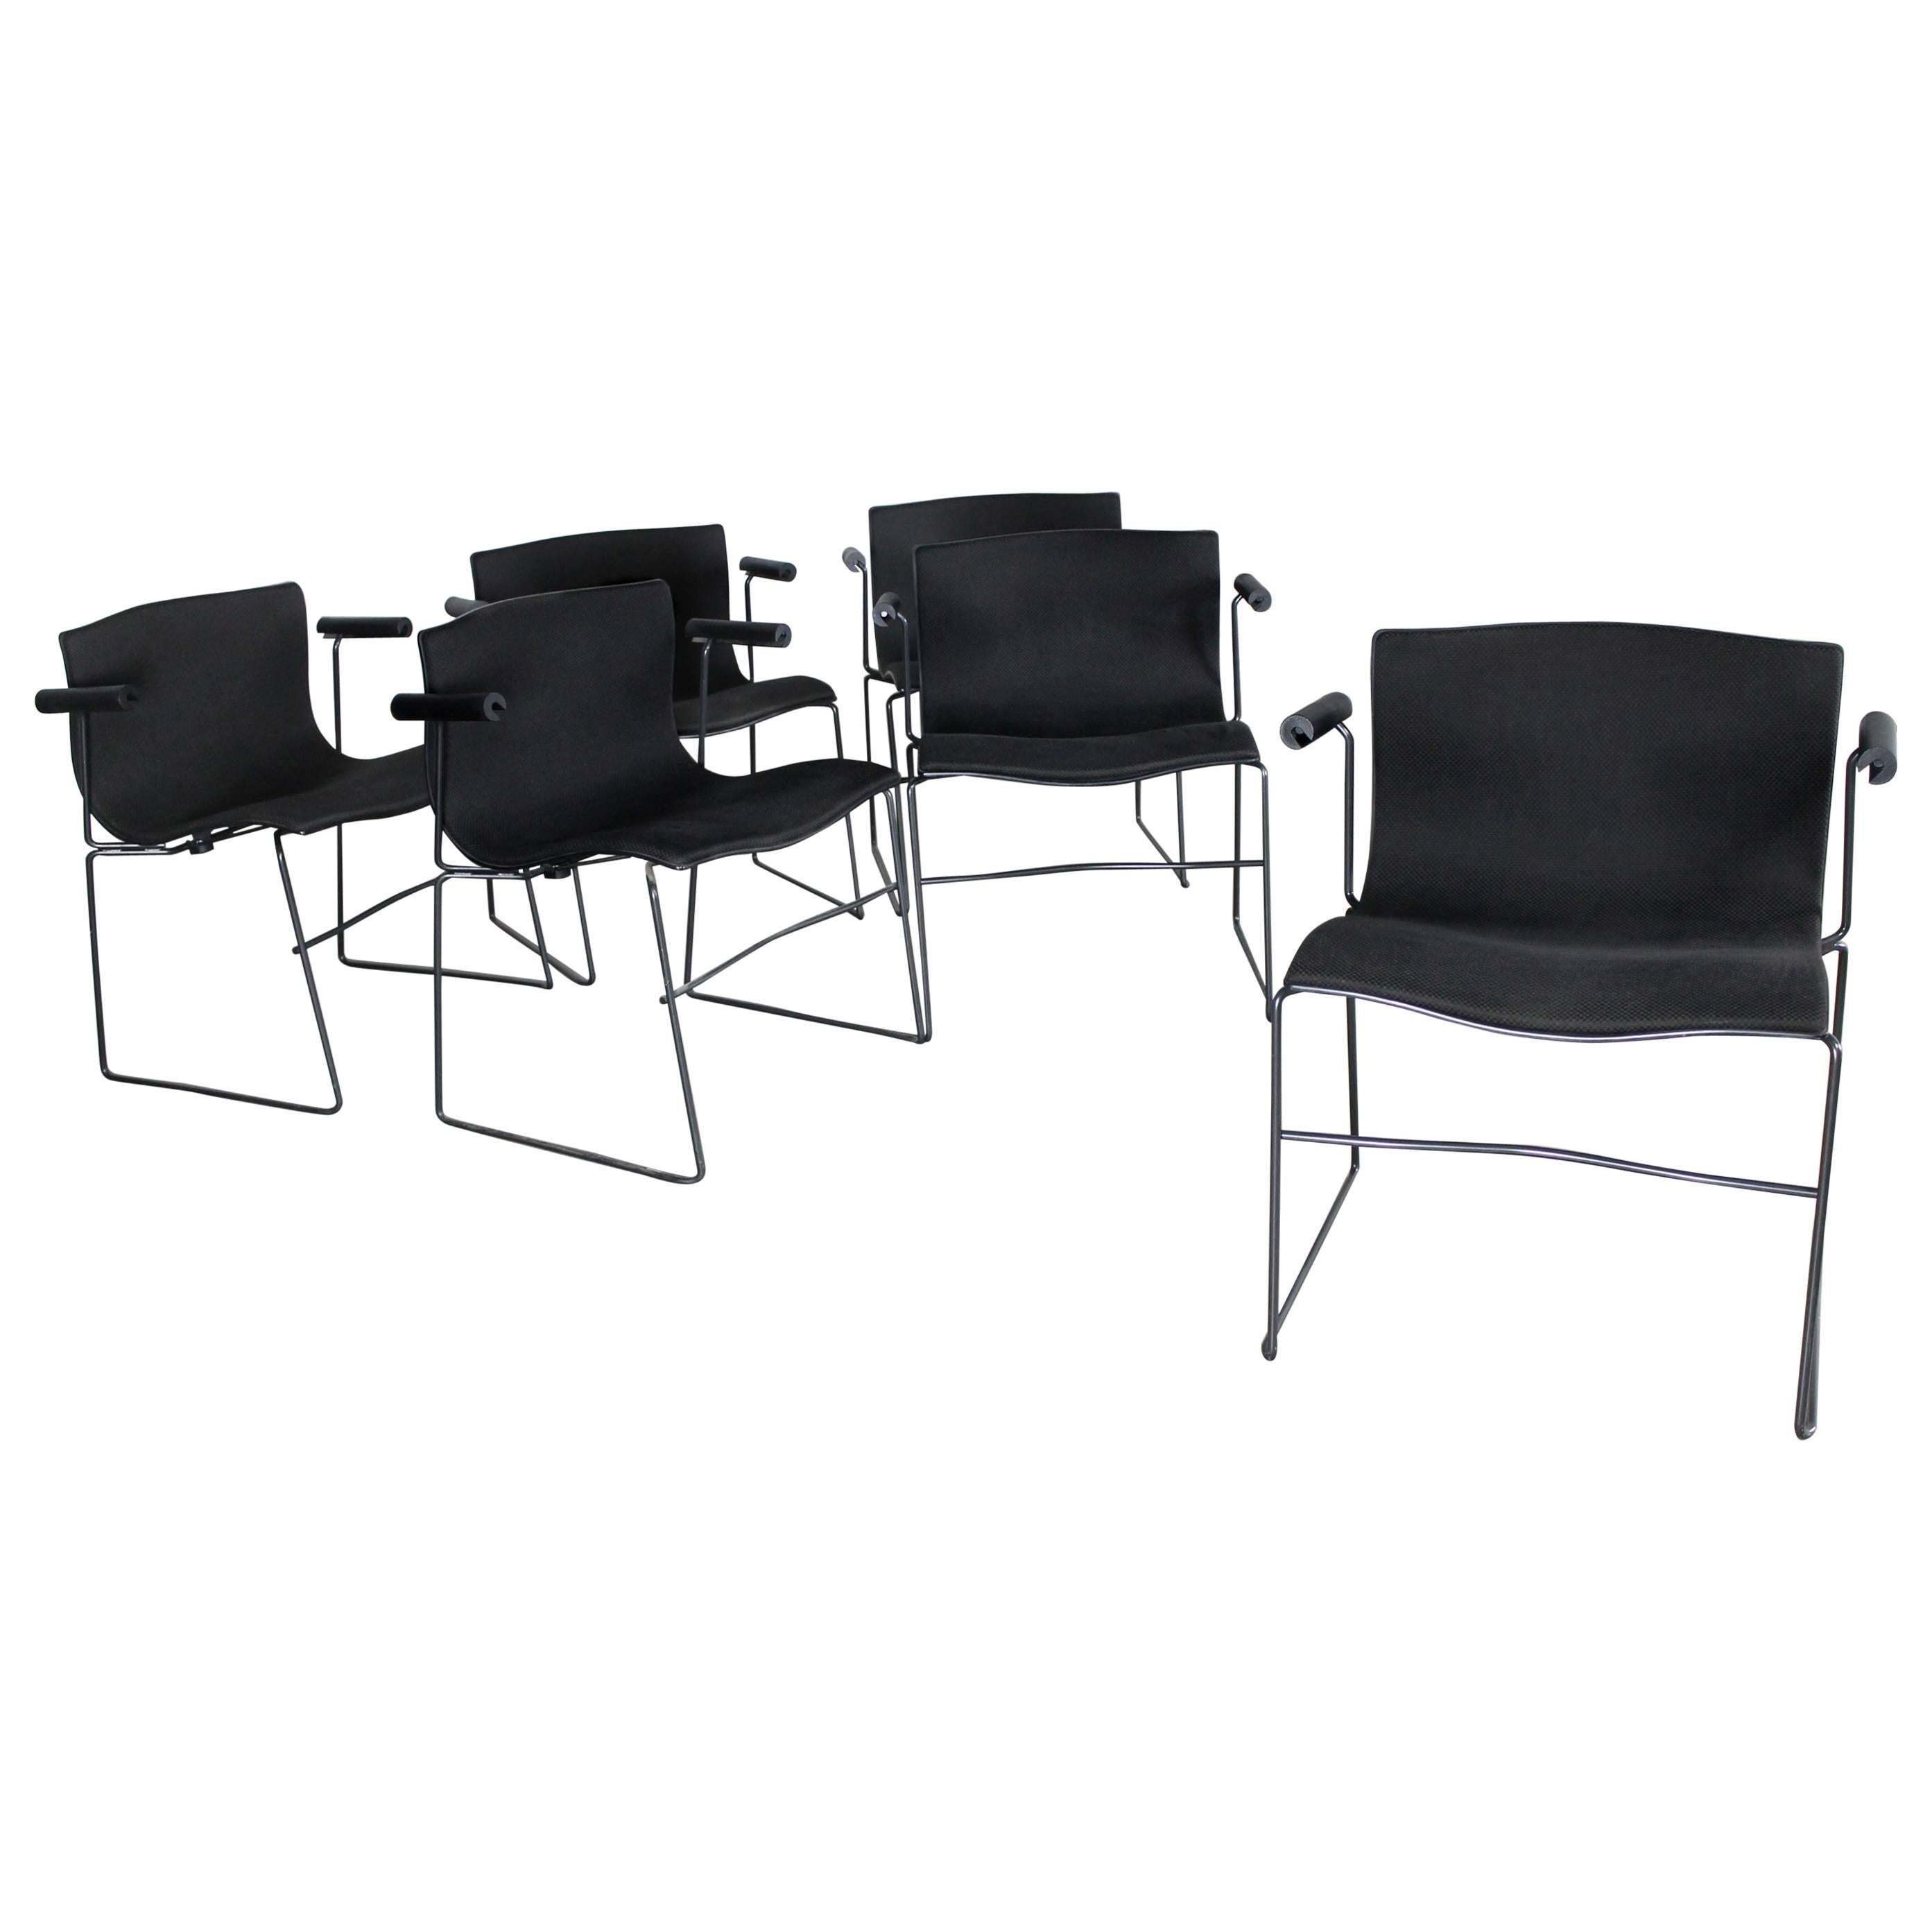 Six Vintage Handkerchief Armchairs by Massimo and Lella Vignelli for Knoll